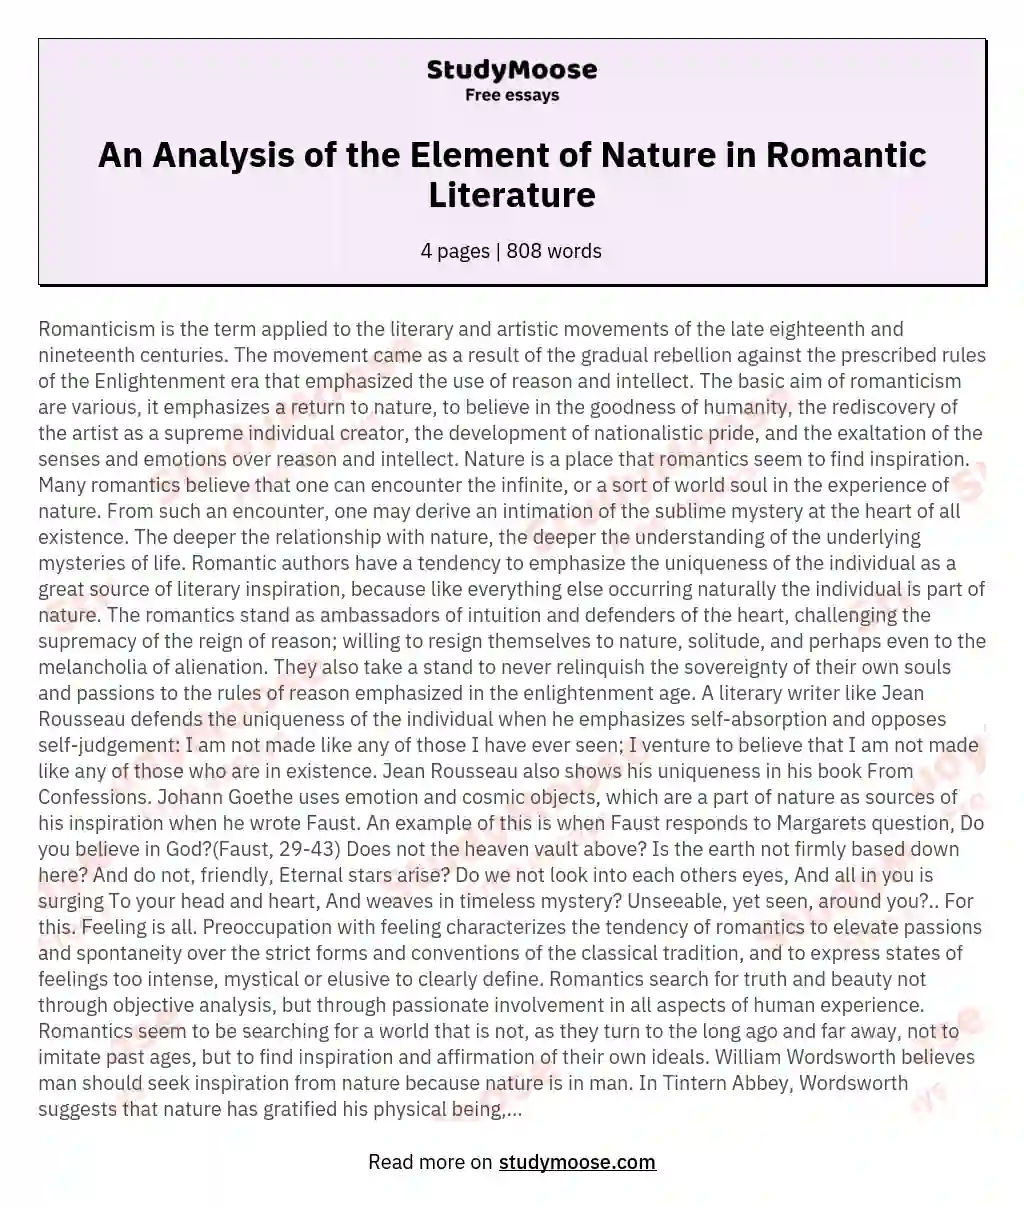 An Analysis of the Element of Nature in Romantic Literature essay